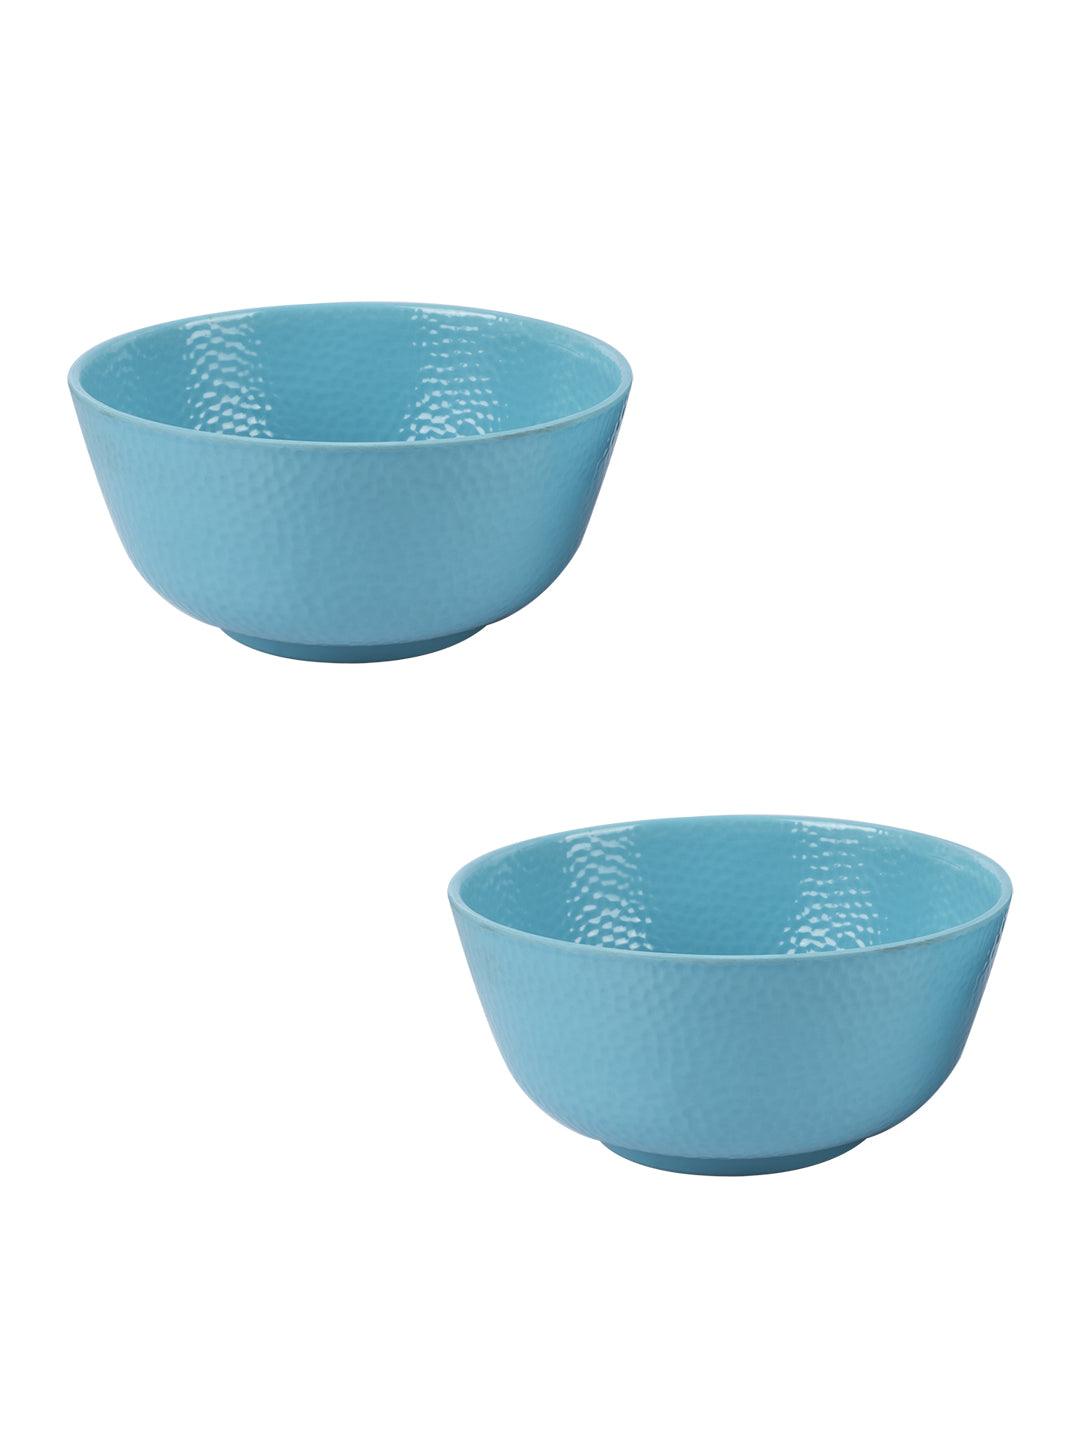 Buy Melamine Turquoise Round Serving Bowl (Set of 2) at the best